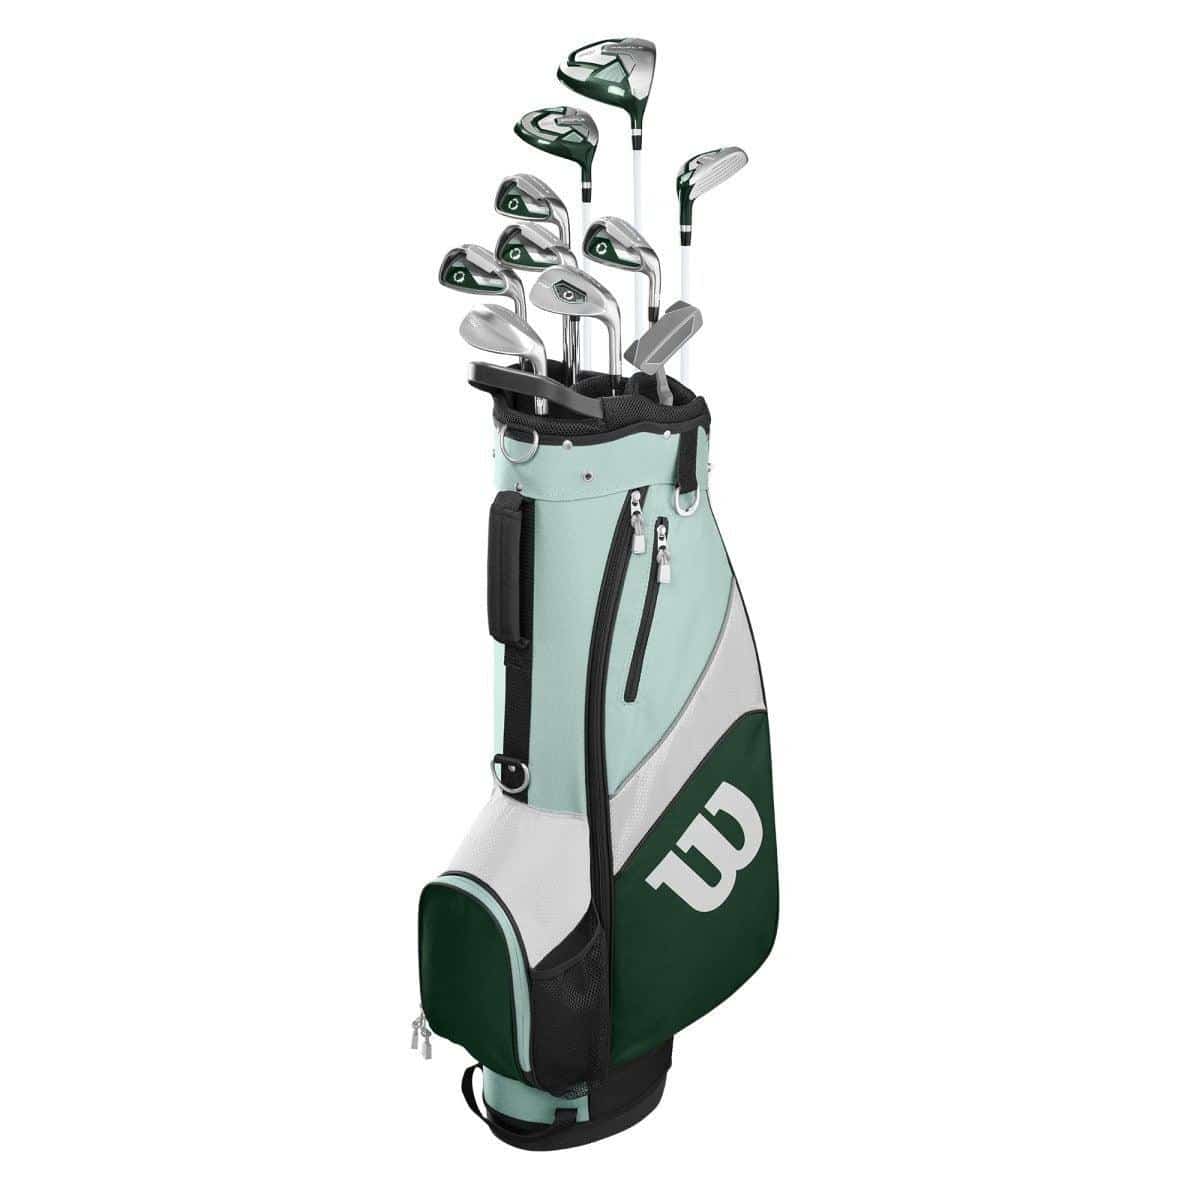 Top 6 Petite Womens Golf Clubs of 2021